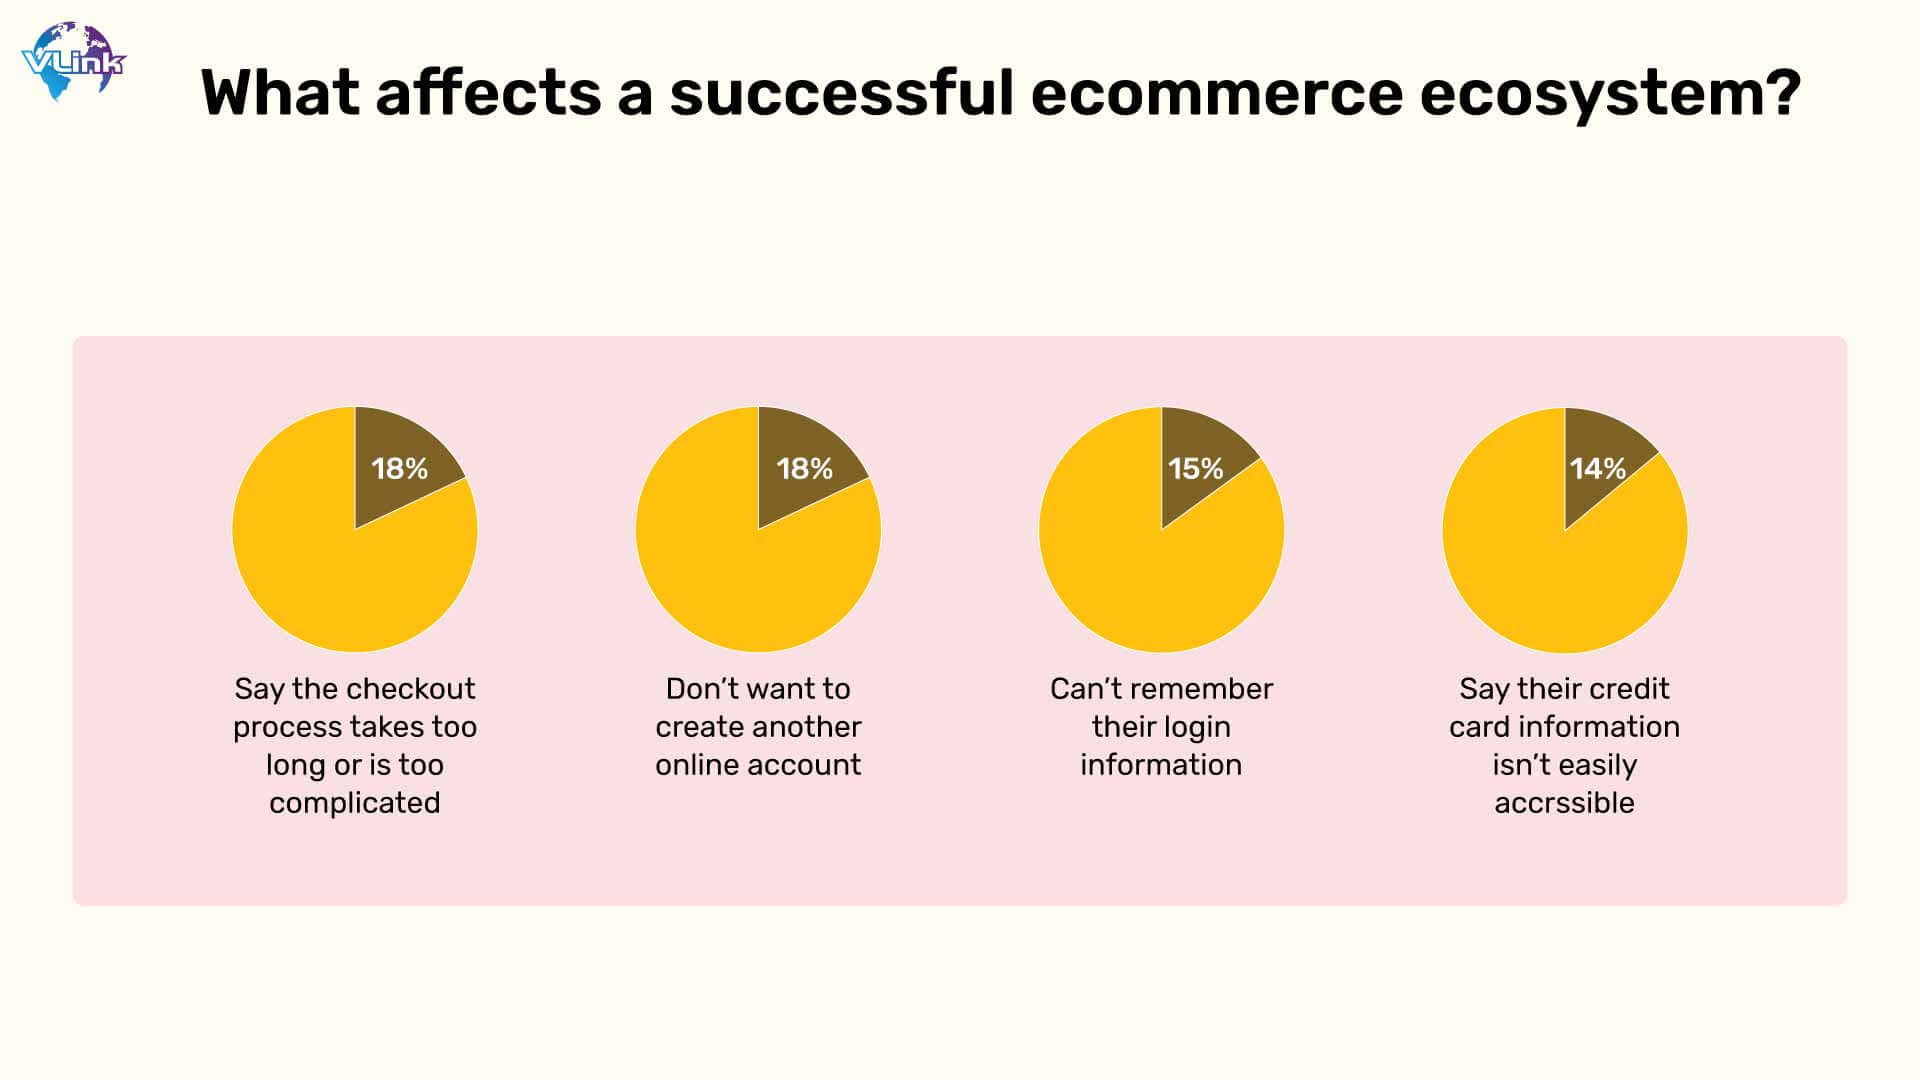 What affects a successful ecommerce ecosystem